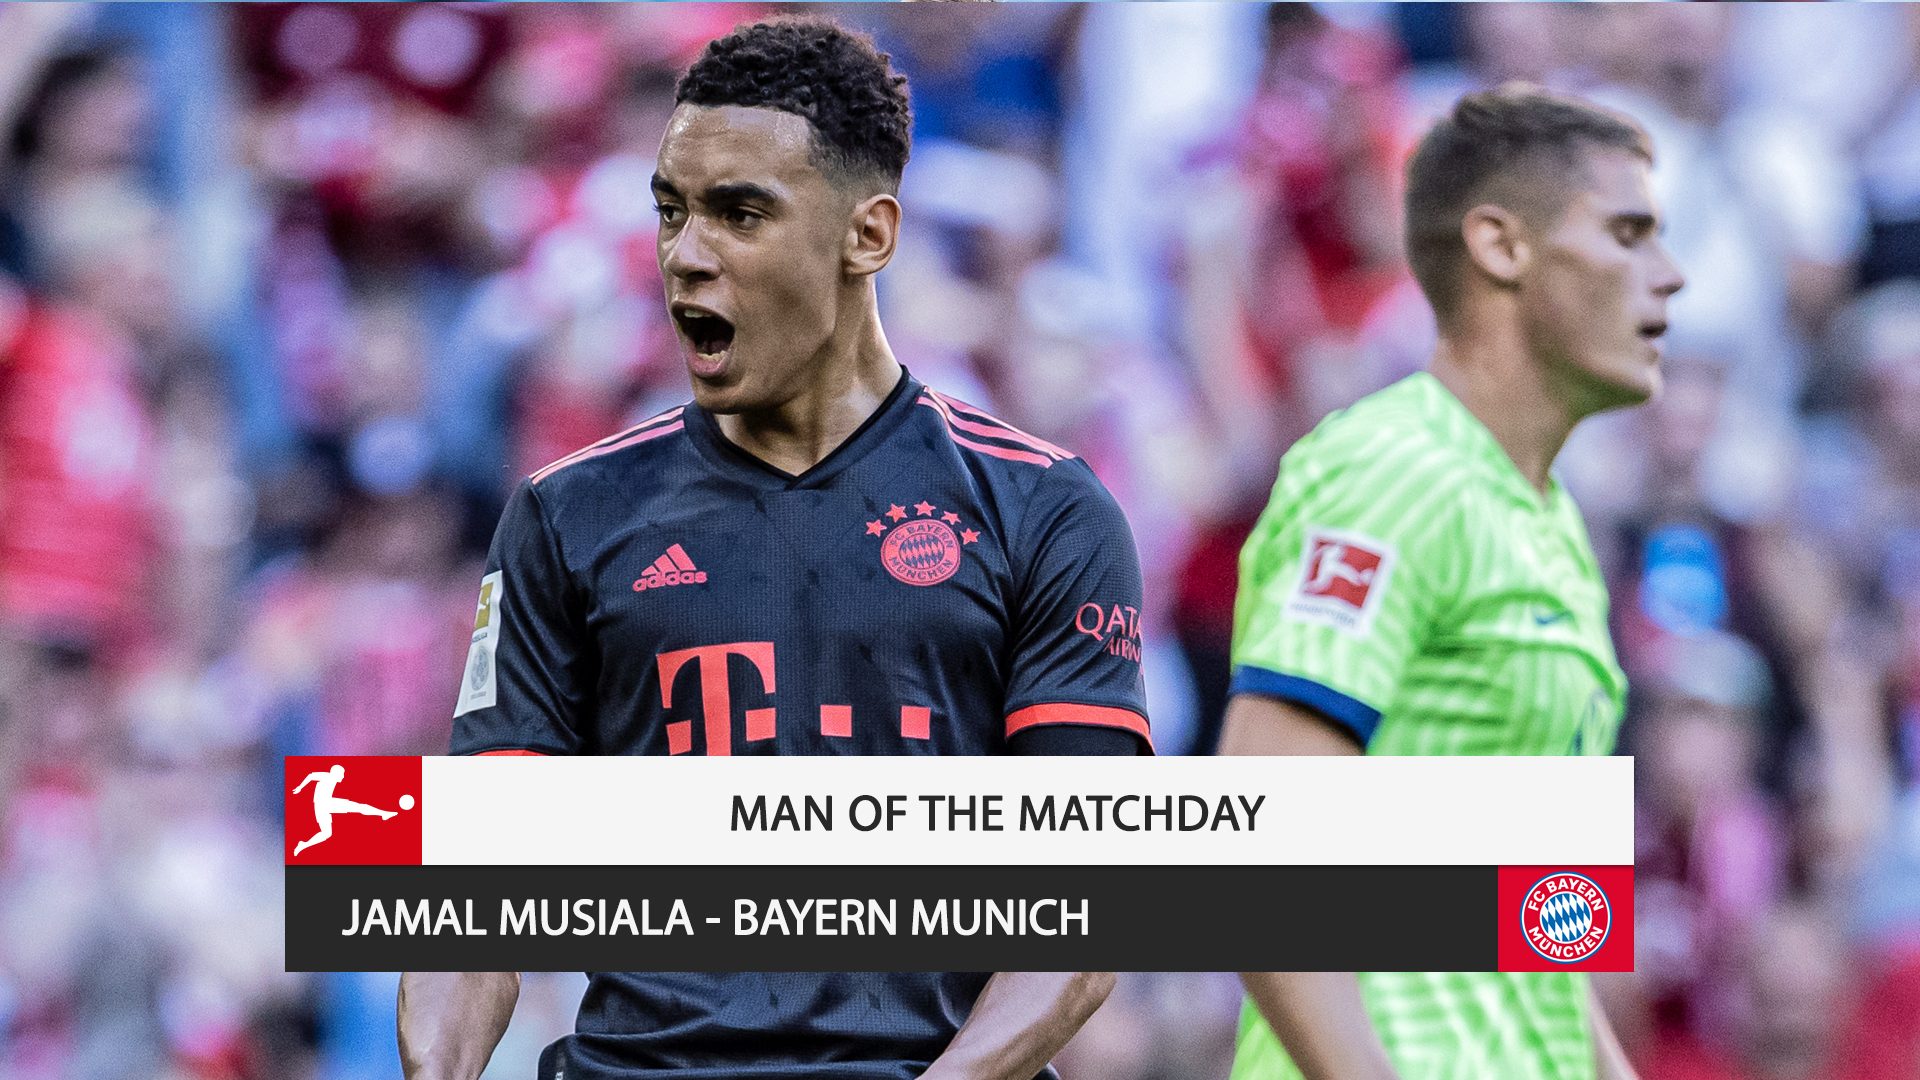 Jamal Musiala: Bayern Munich's Record Breaking Youngster And MD2's Man Of The Matchday